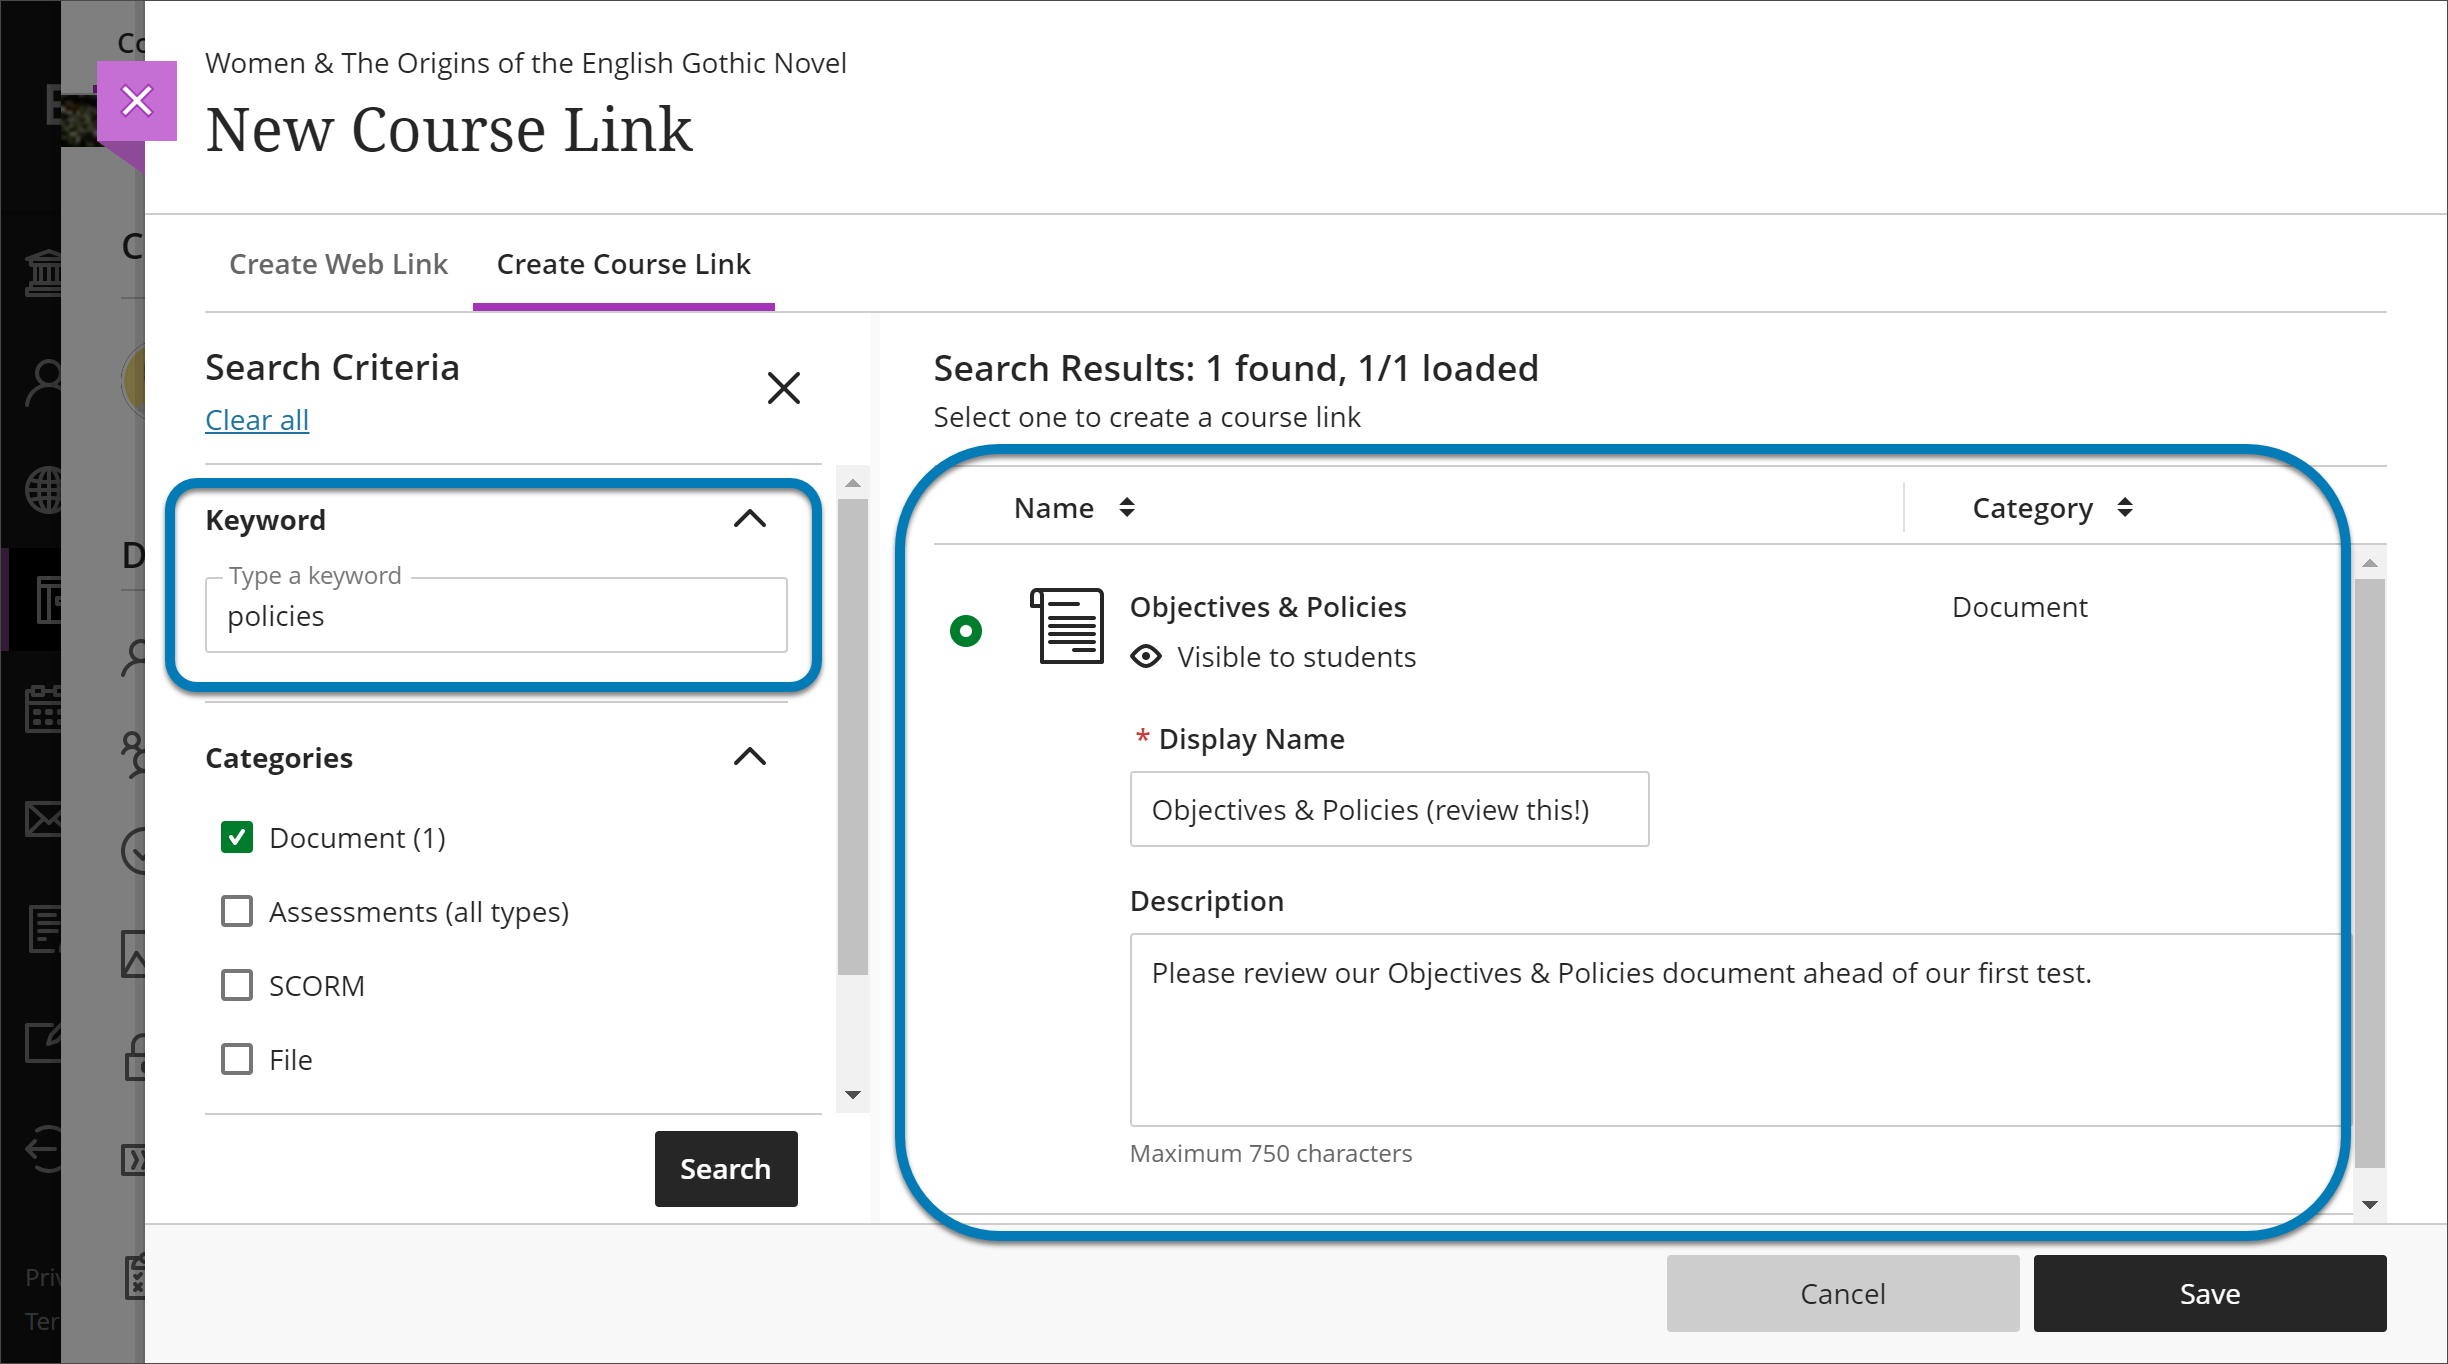 Image of Create Course Link tab with a blue box highlighting the Keyword field of the Search Criteria panel and a blue box highlighting the Search Results panel